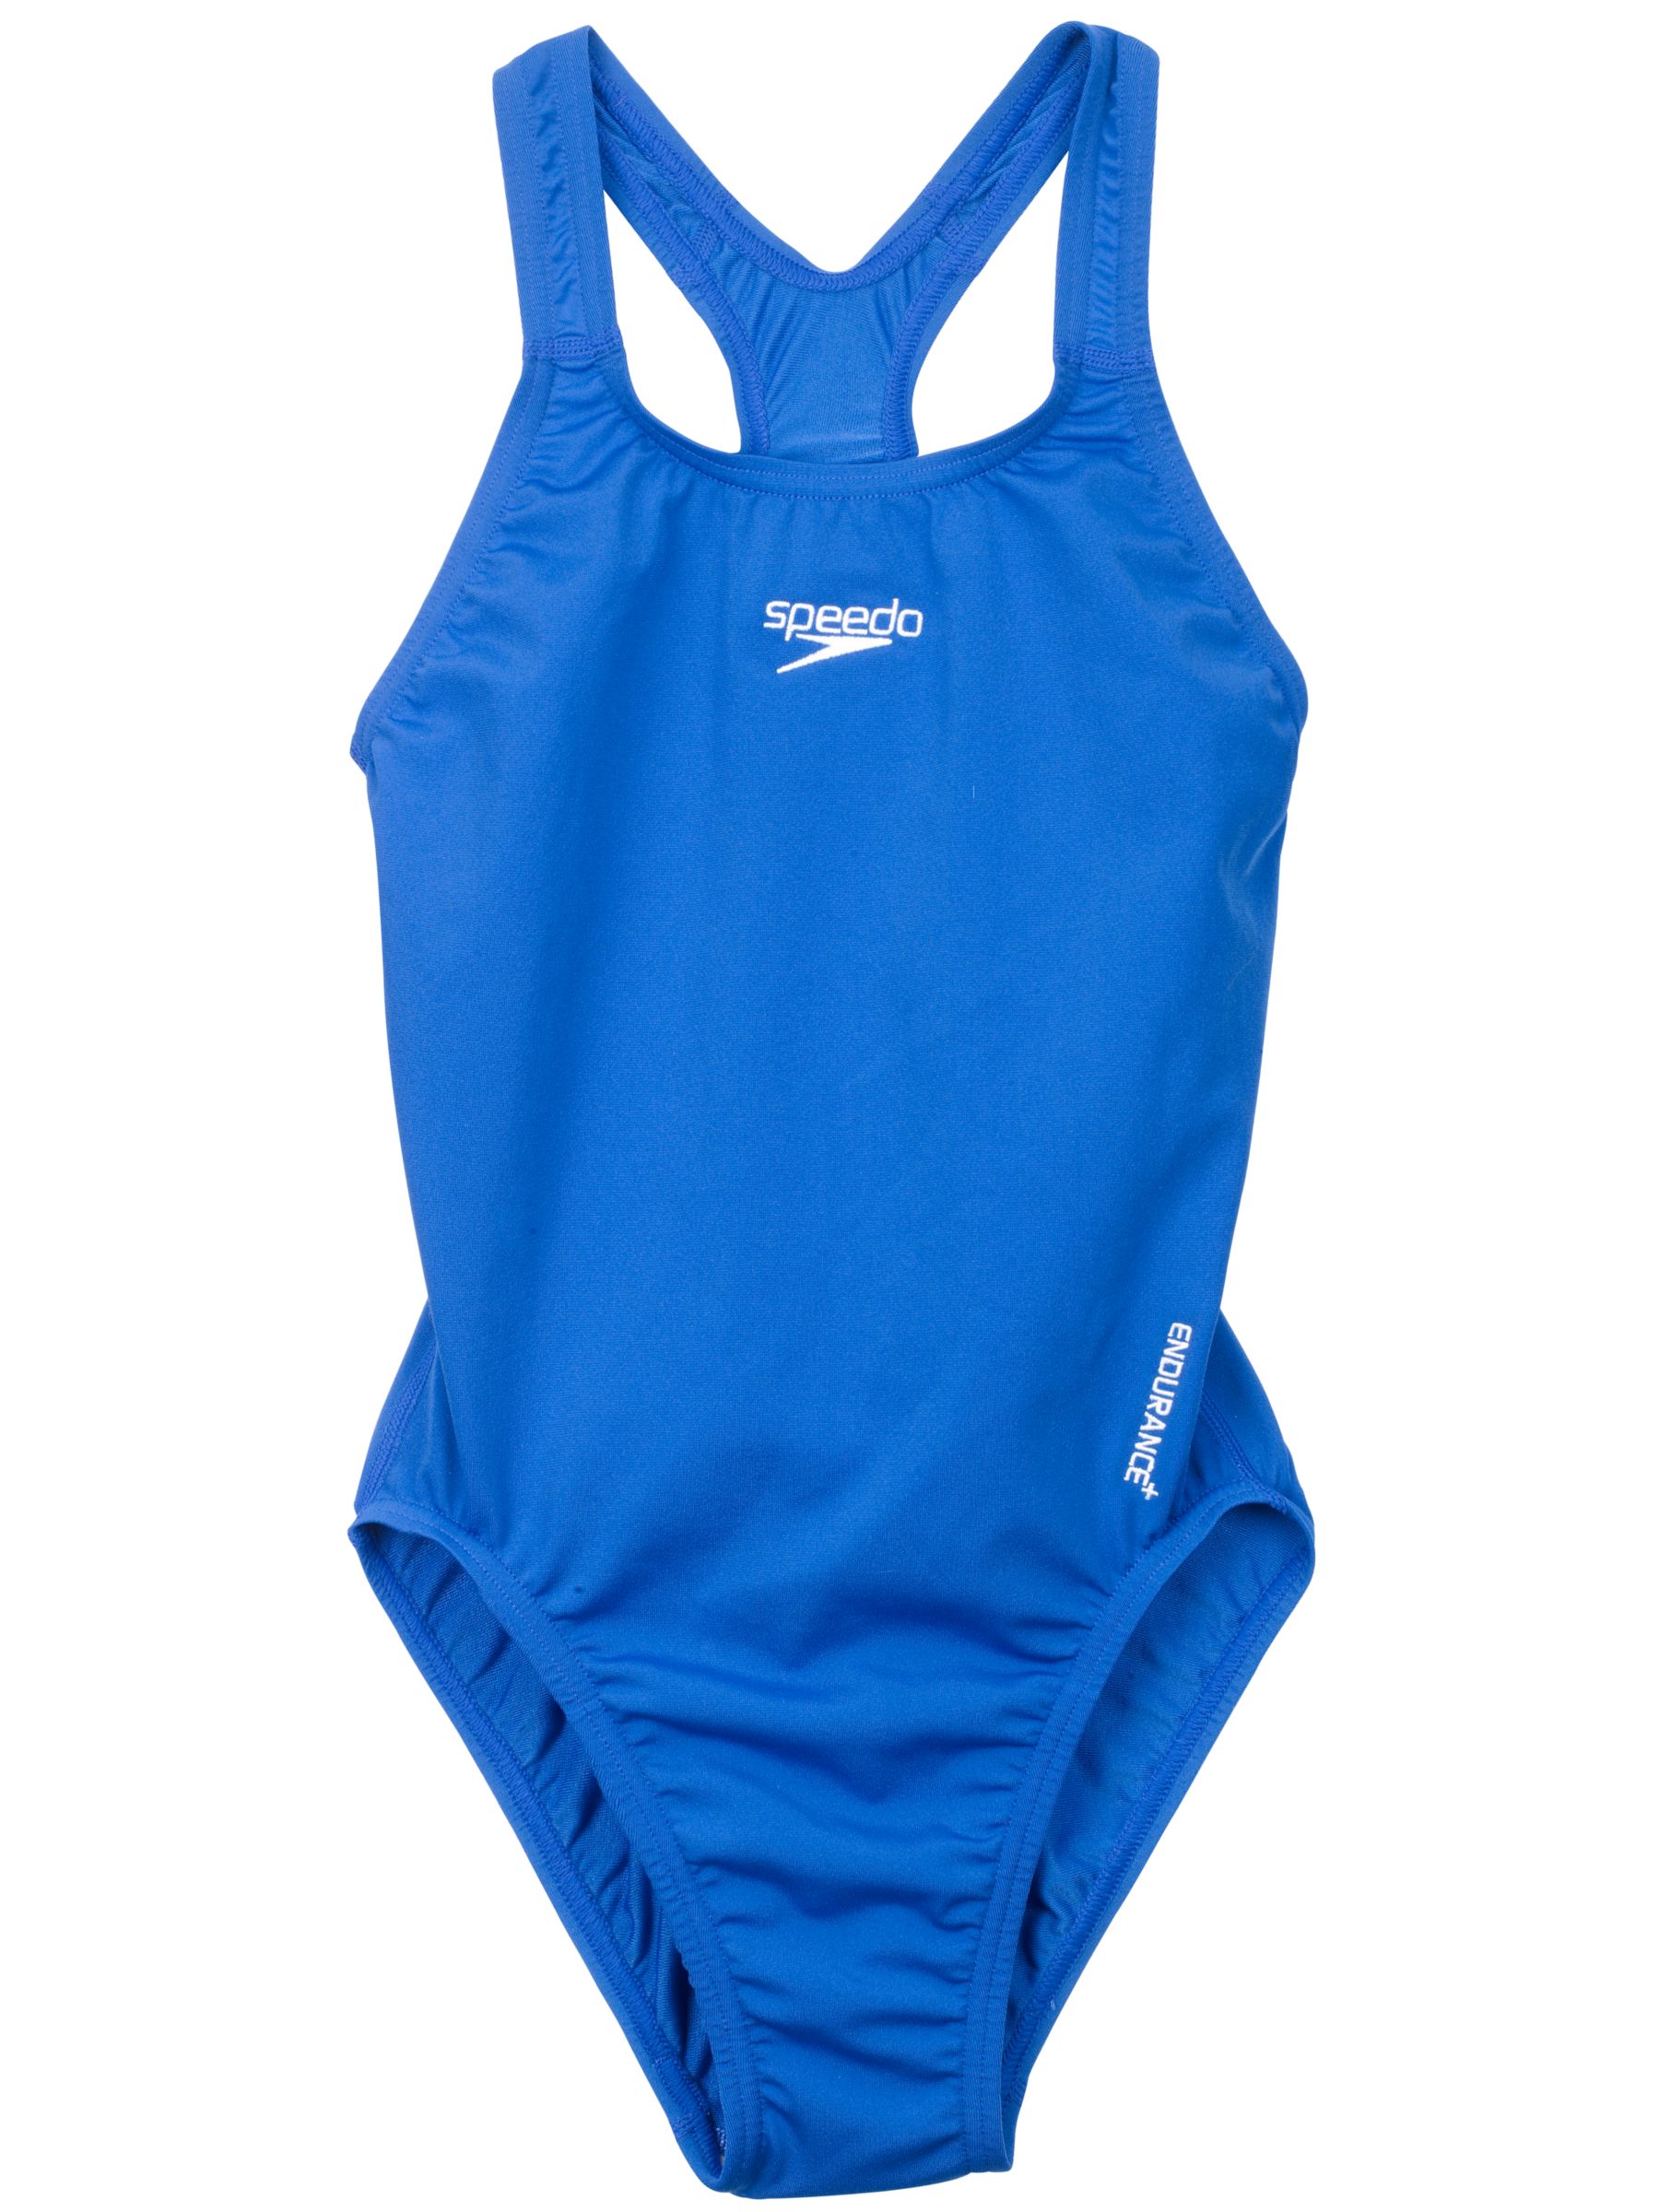 Medalist Swimsuit, Blue, 12 Years